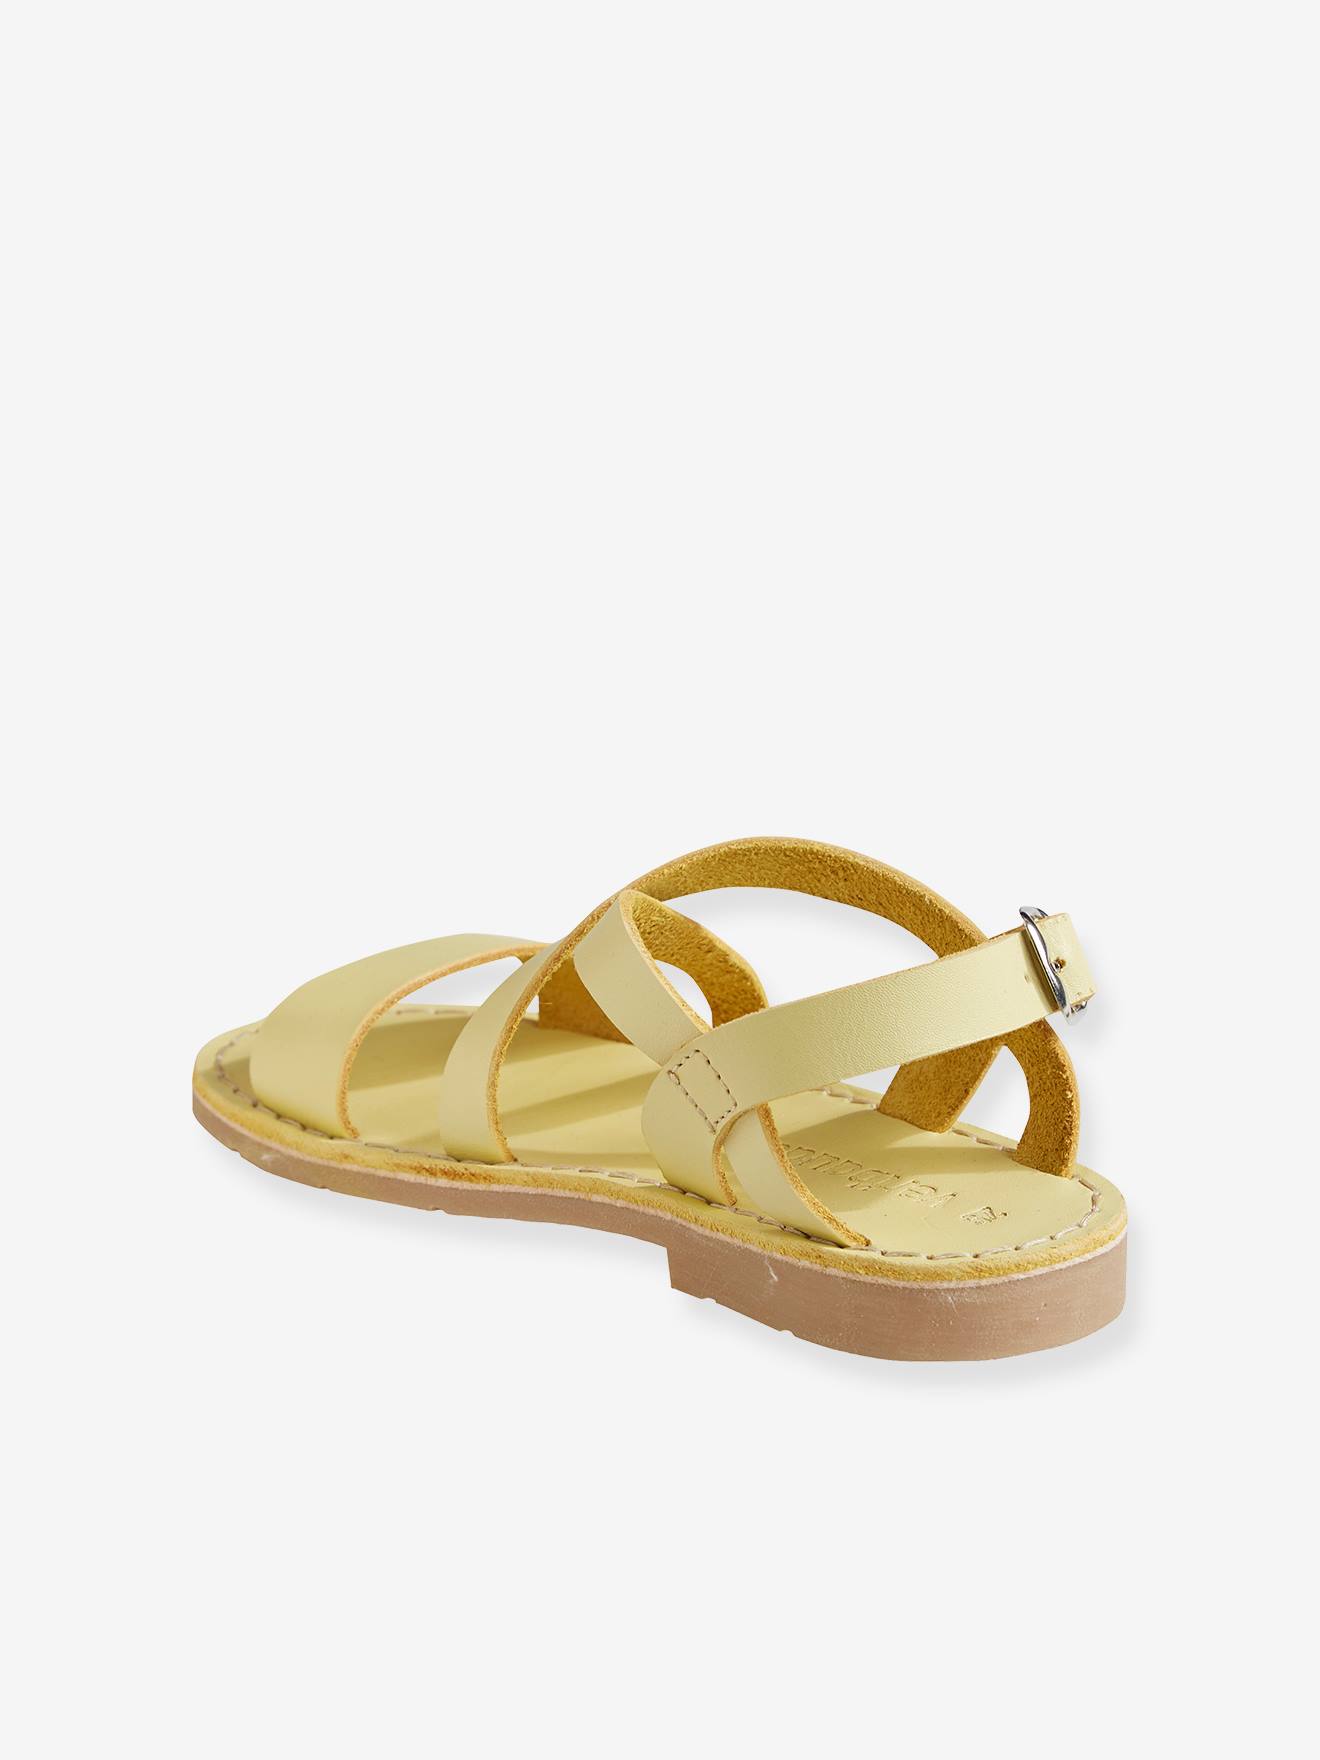 Buy Mustard Sandals for Girls by Wotnot Online | Ajio.com